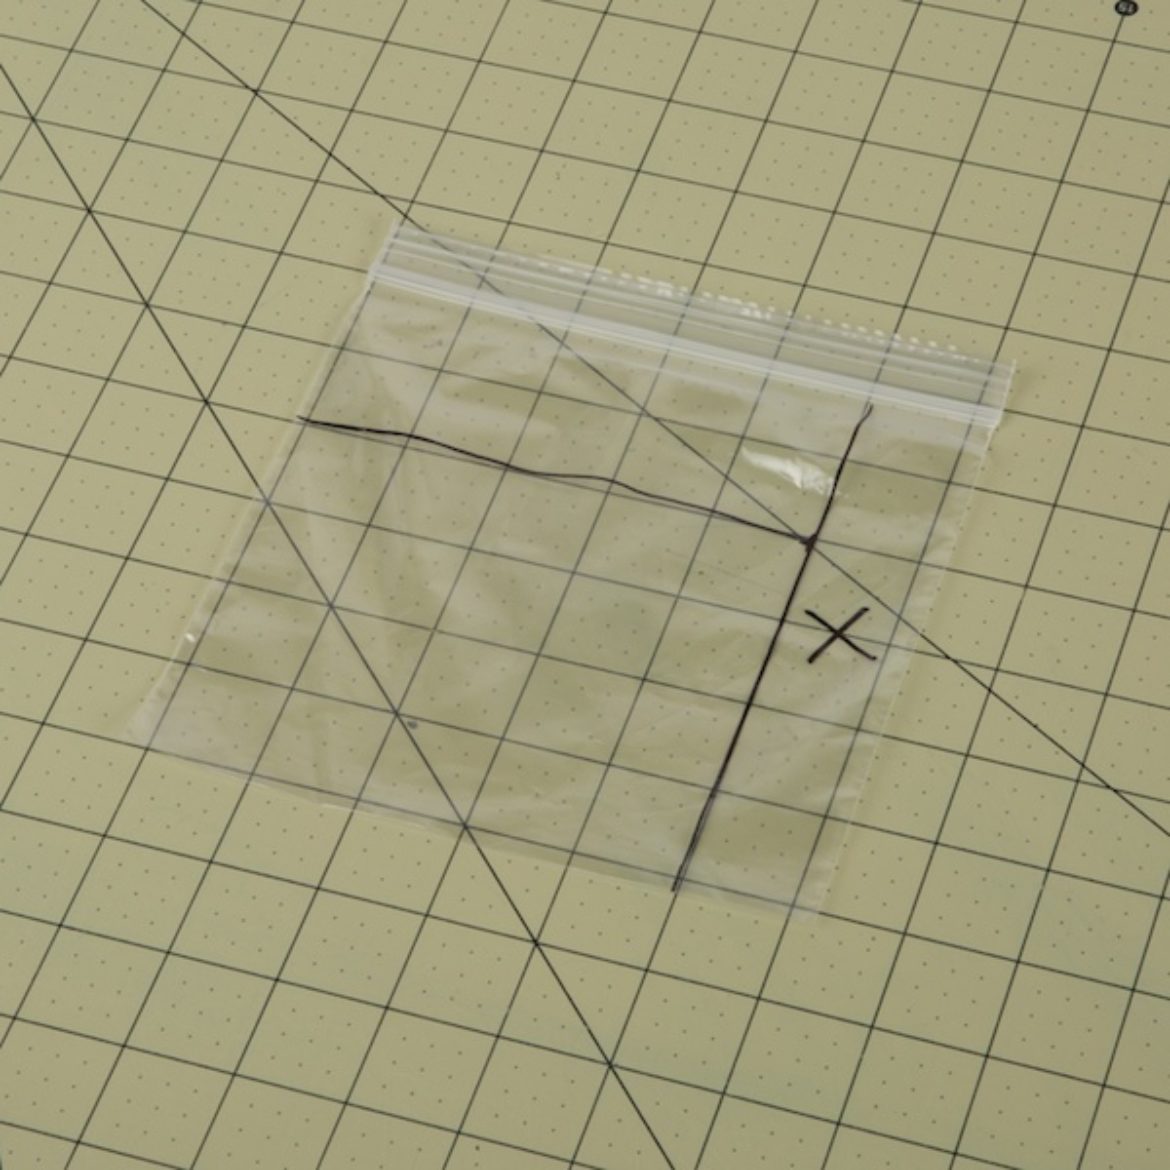 sandwich bag with three sections drawn on it